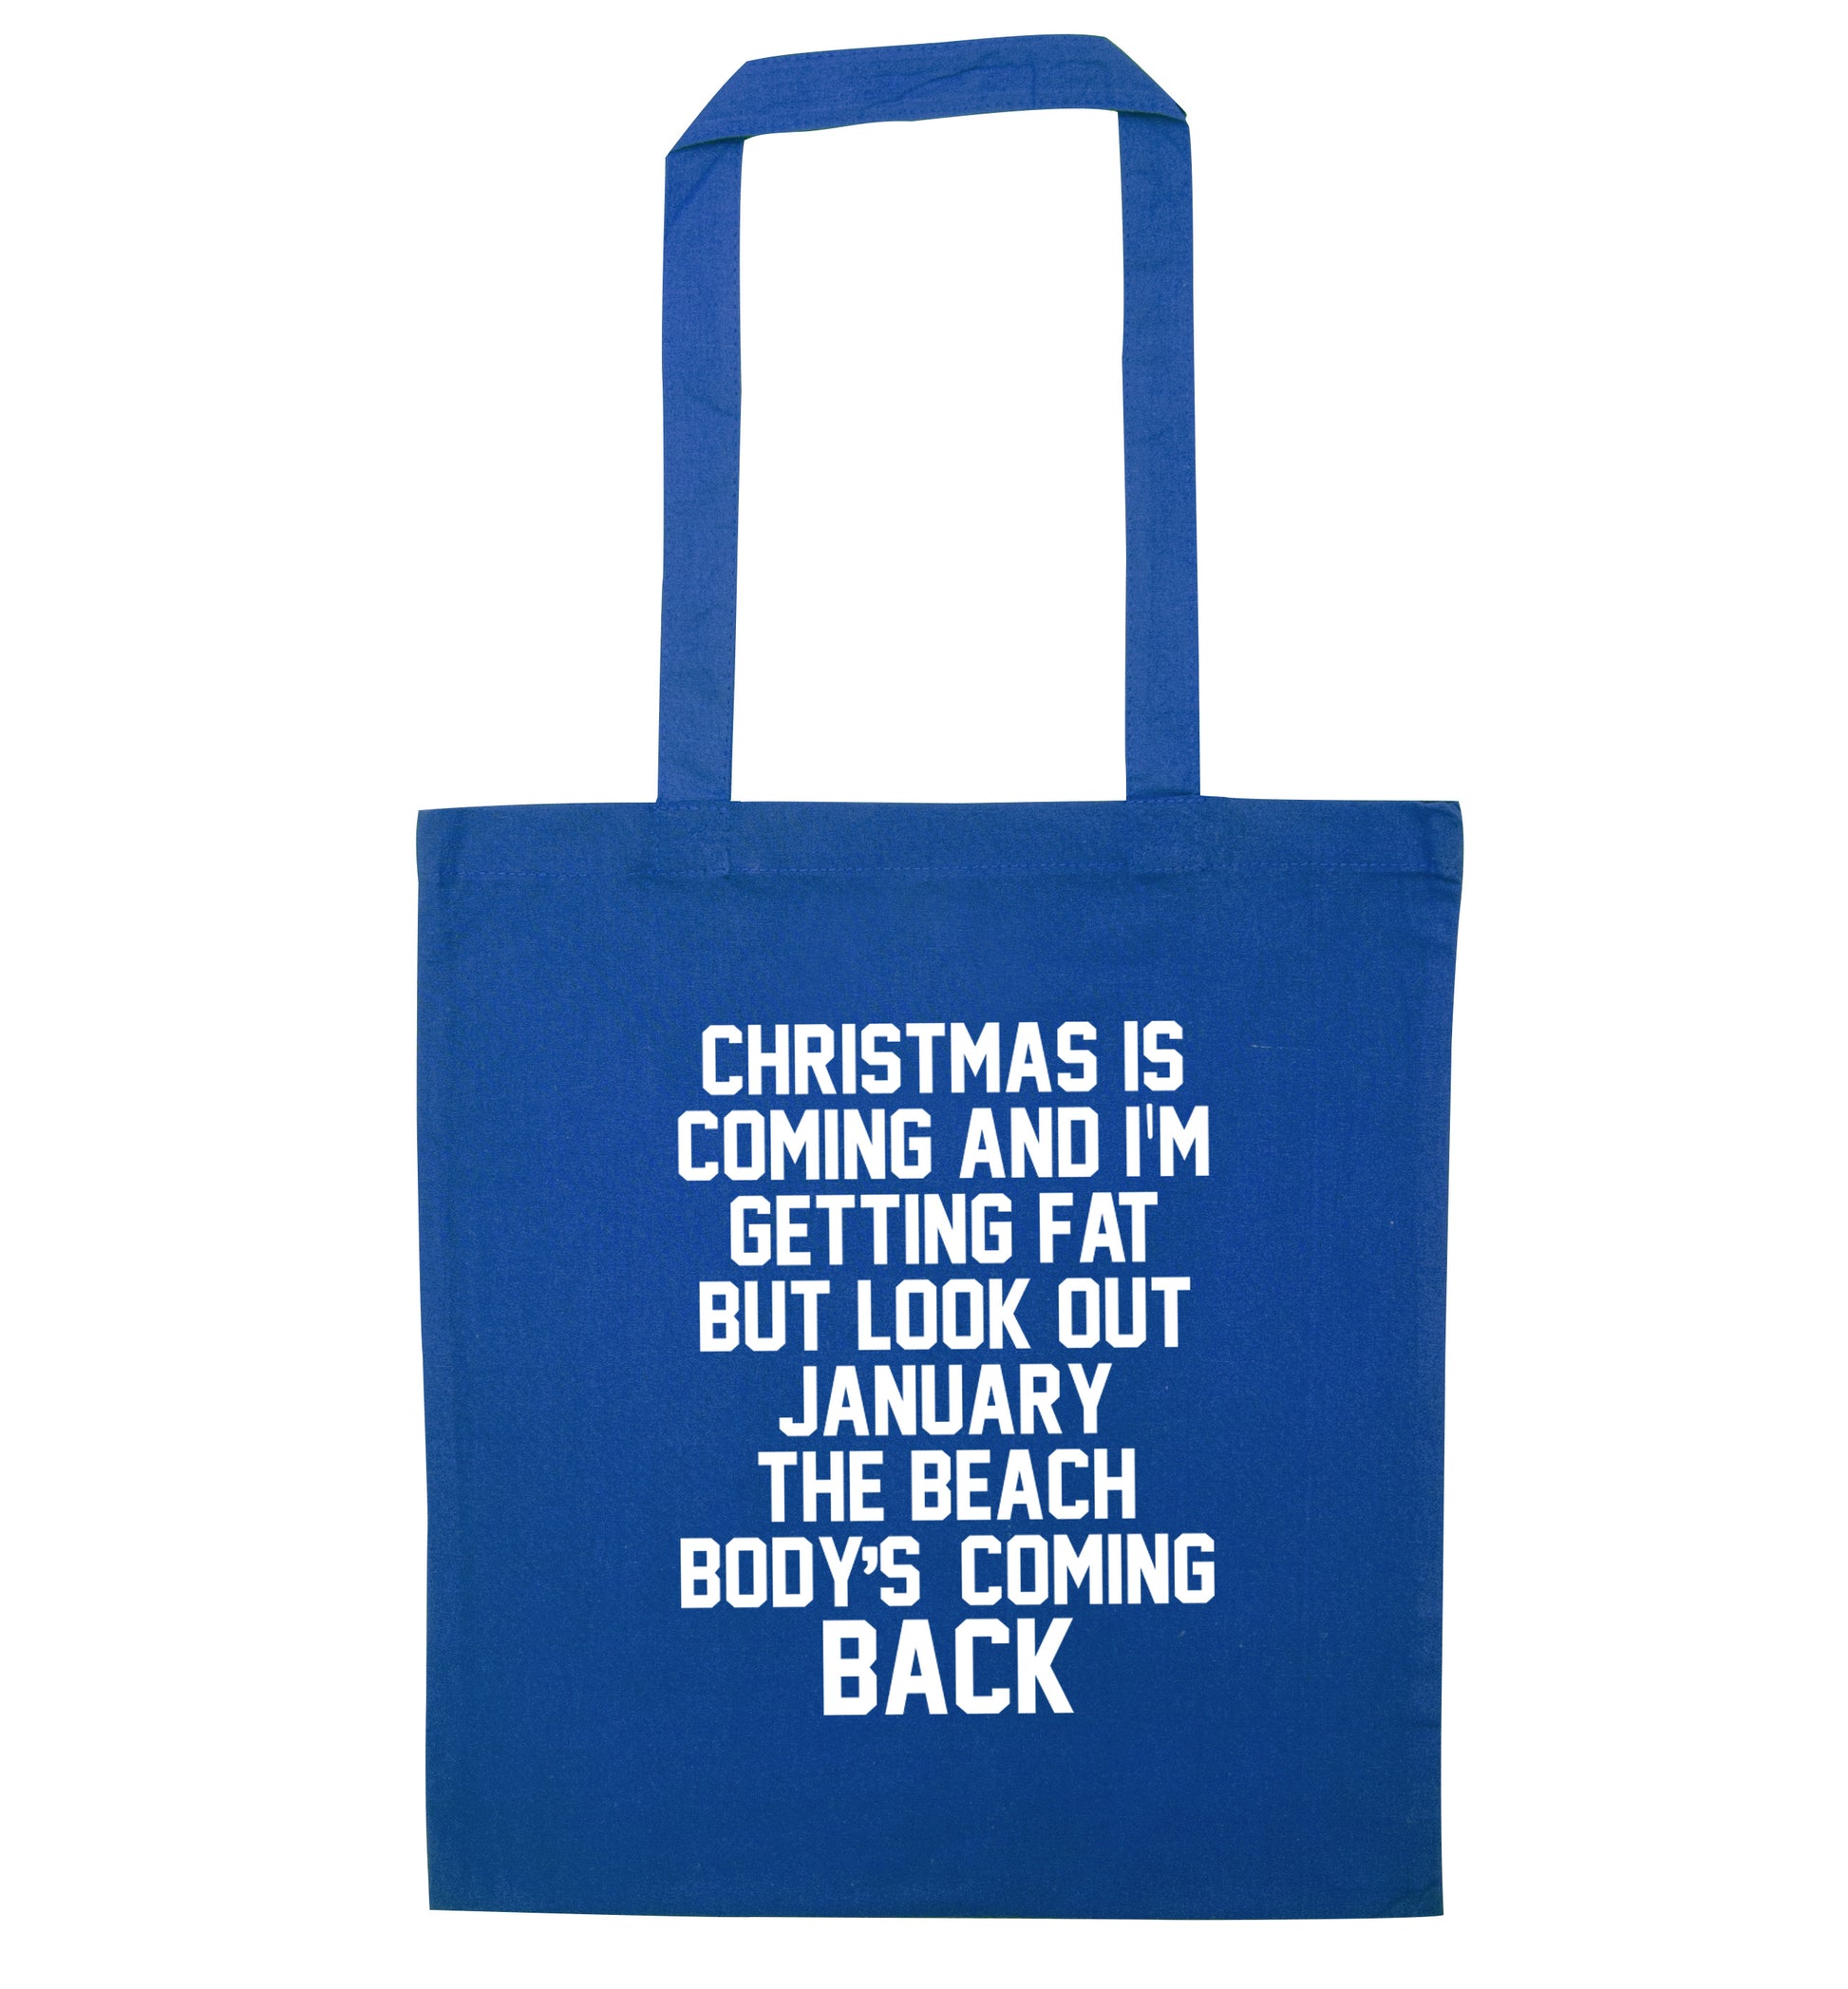 Christmas is coming and I'm getting fat but look out January the beach body's coming back! blue tote bag